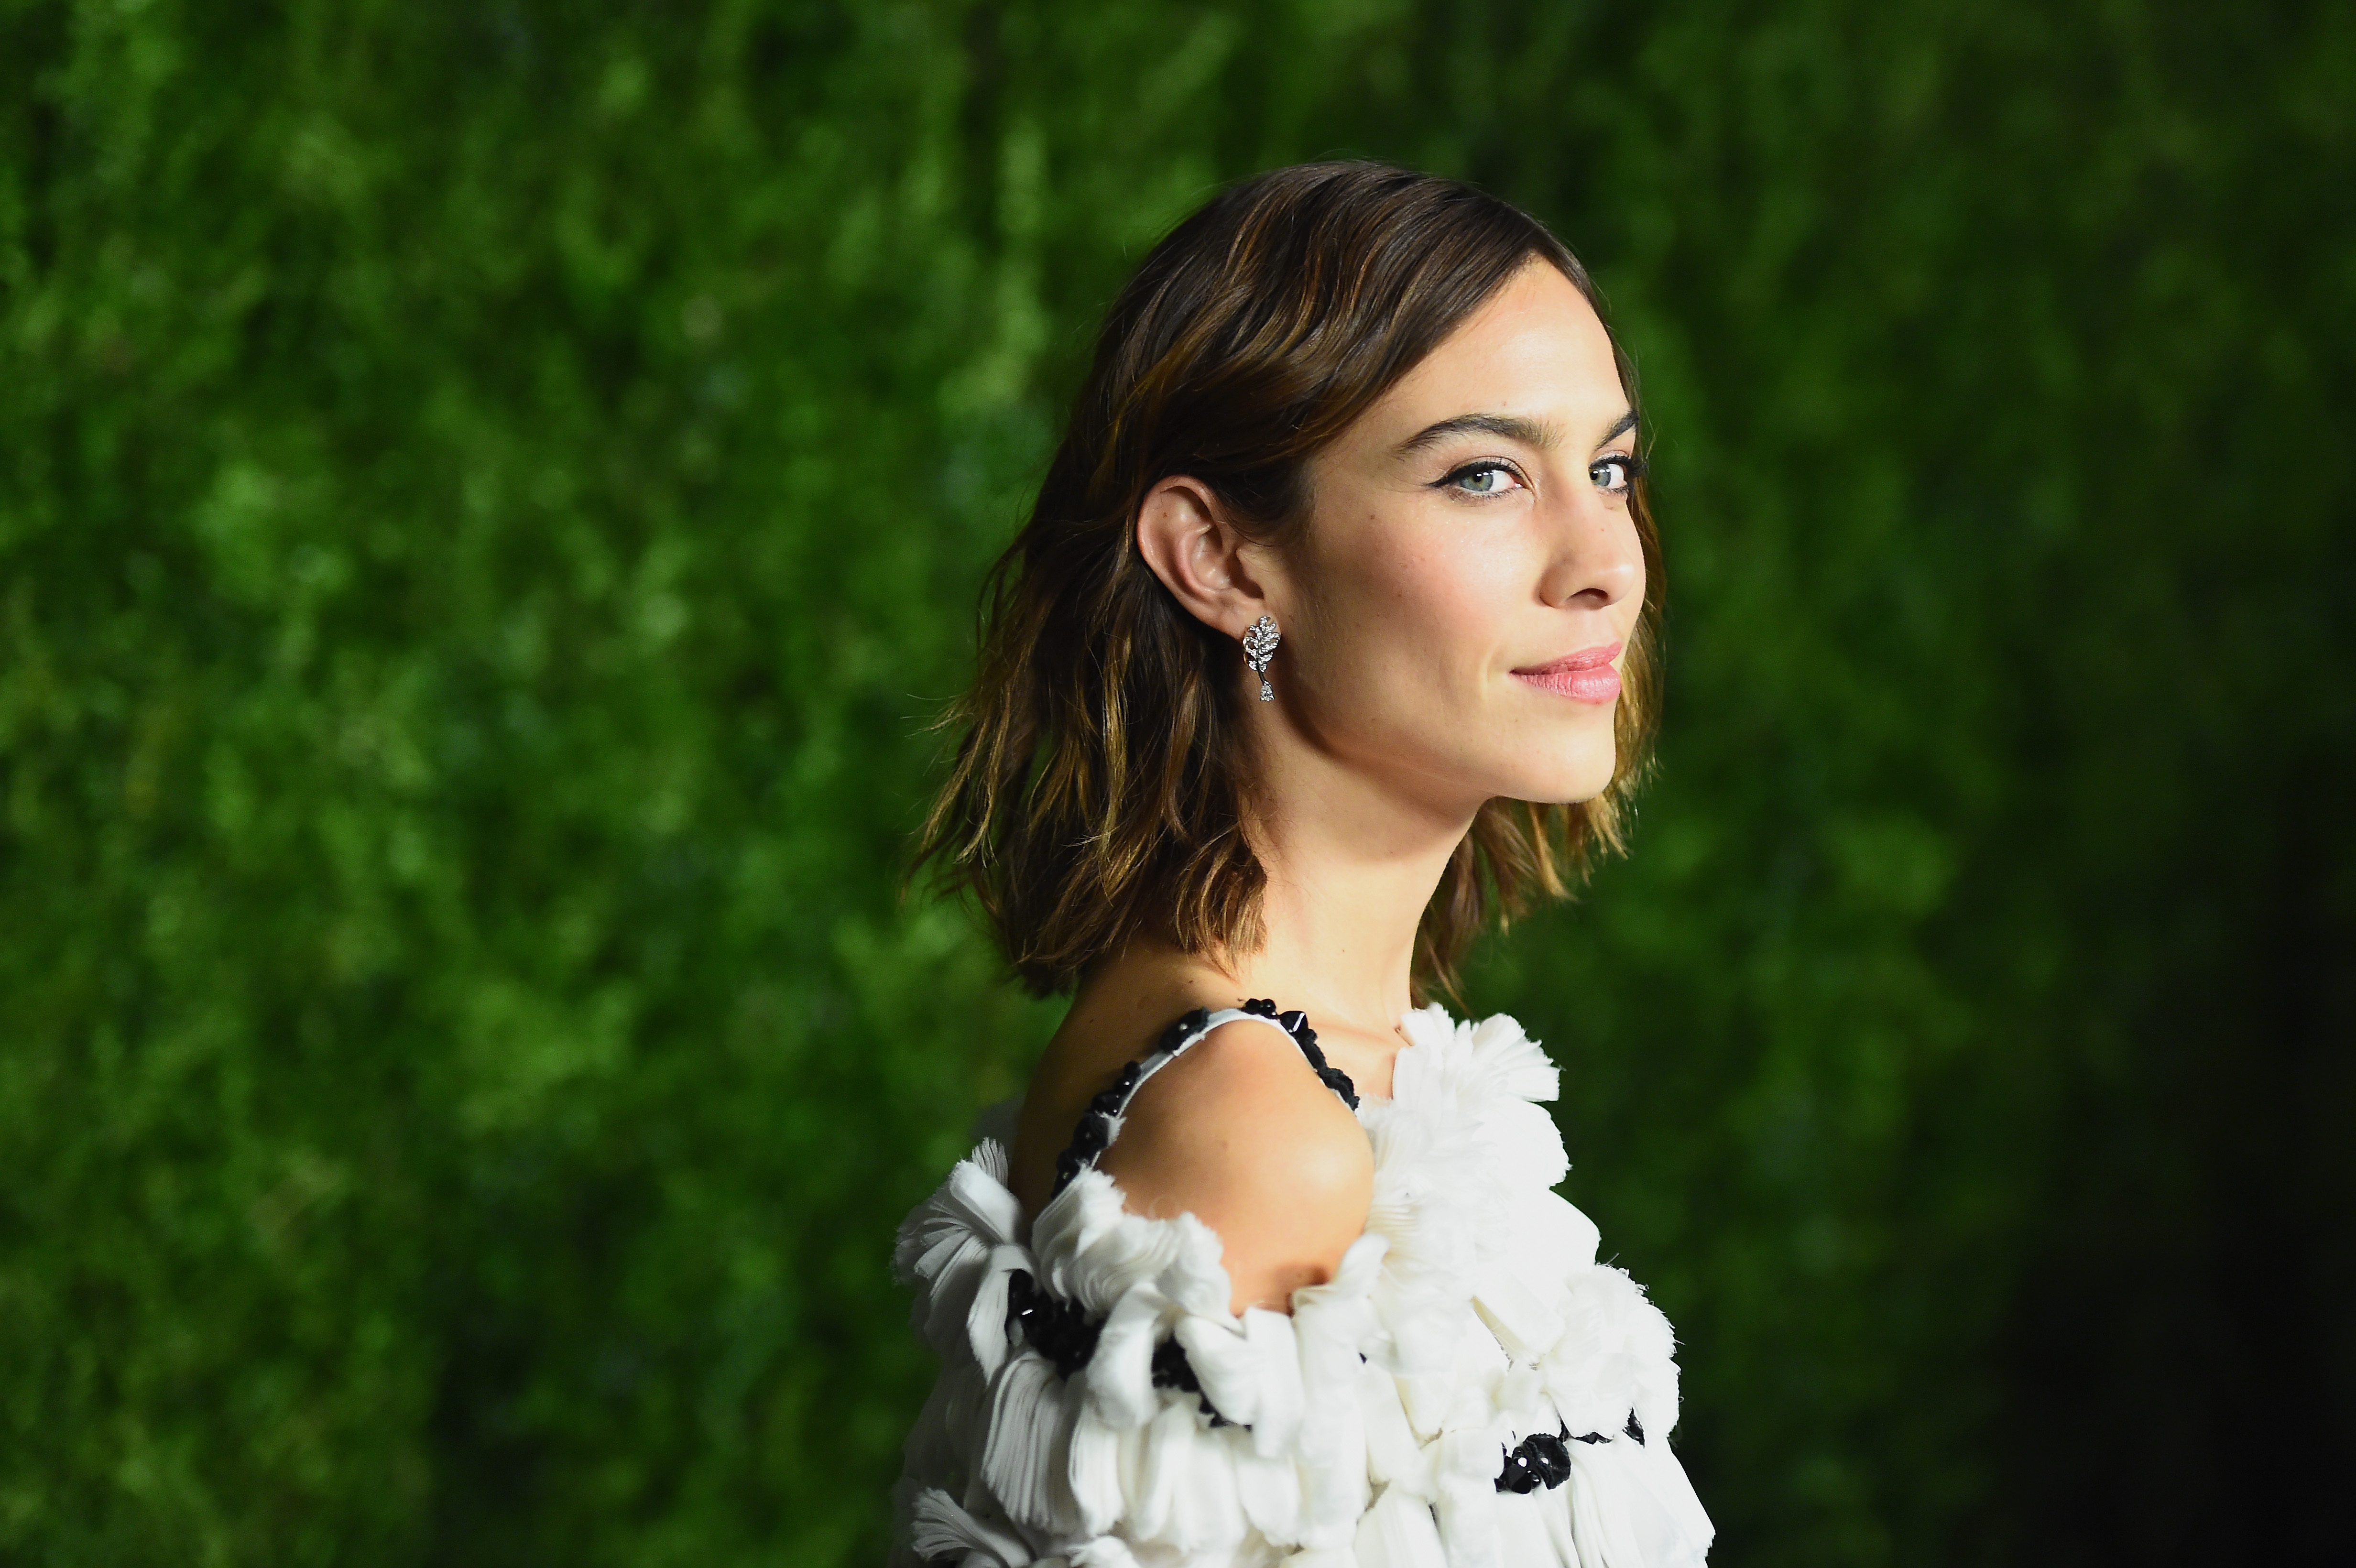 NEW YORK, NY - NOVEMBER 15: Model Alexa Chung attends the MoMA Film Benefit presented by CHANEL, A Tribute To Tom Hanks at MOMA on November 15, 2016 in New York City.  (Photo by Nicholas Hunt/WireImage) *** Local Caption *** Alexa Chung